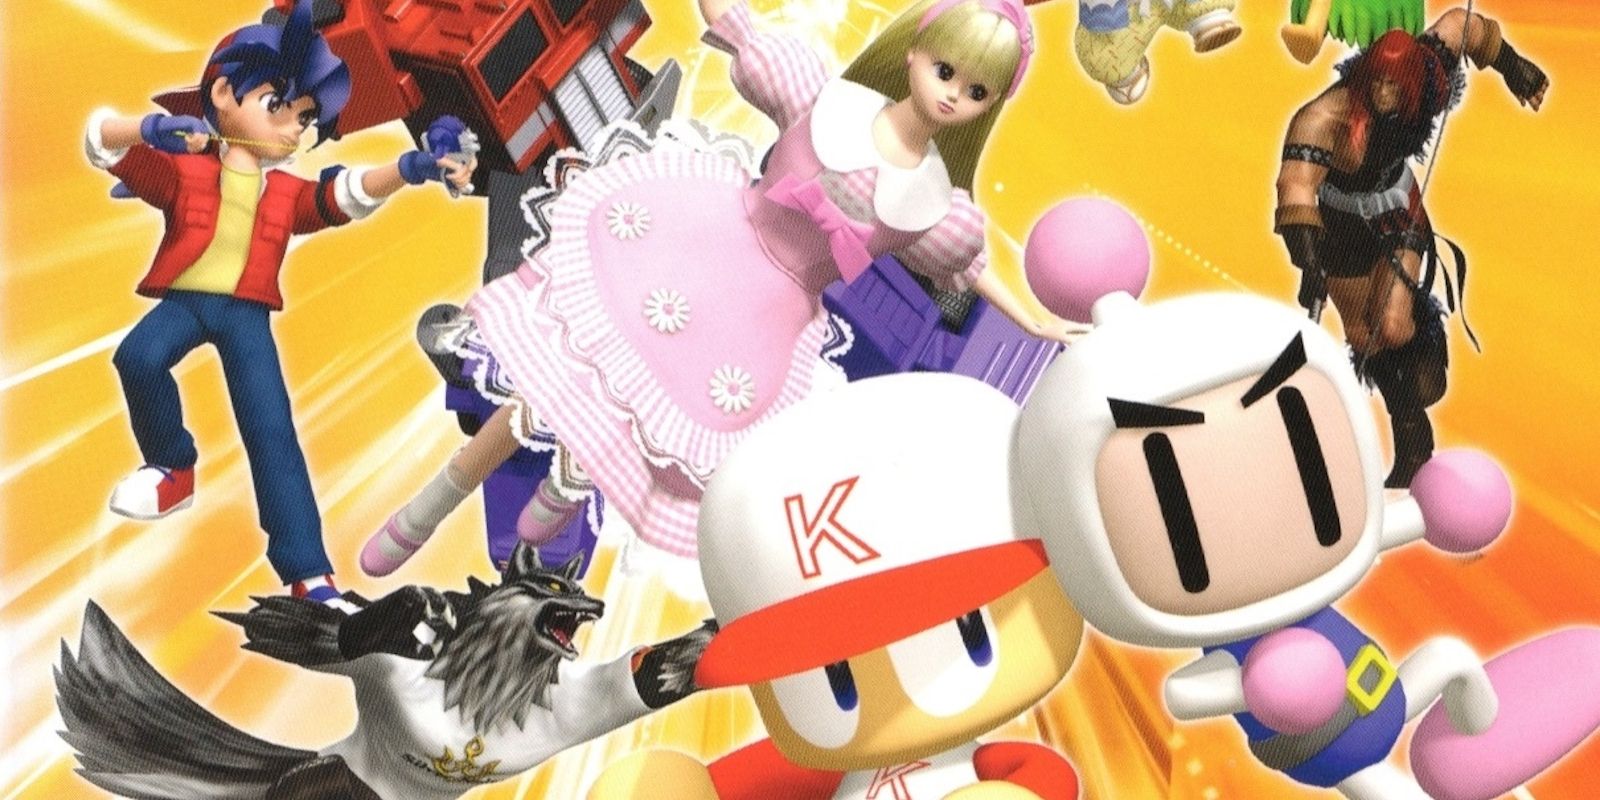 Promotional art featuring characters from DreamMix TV World Fighters